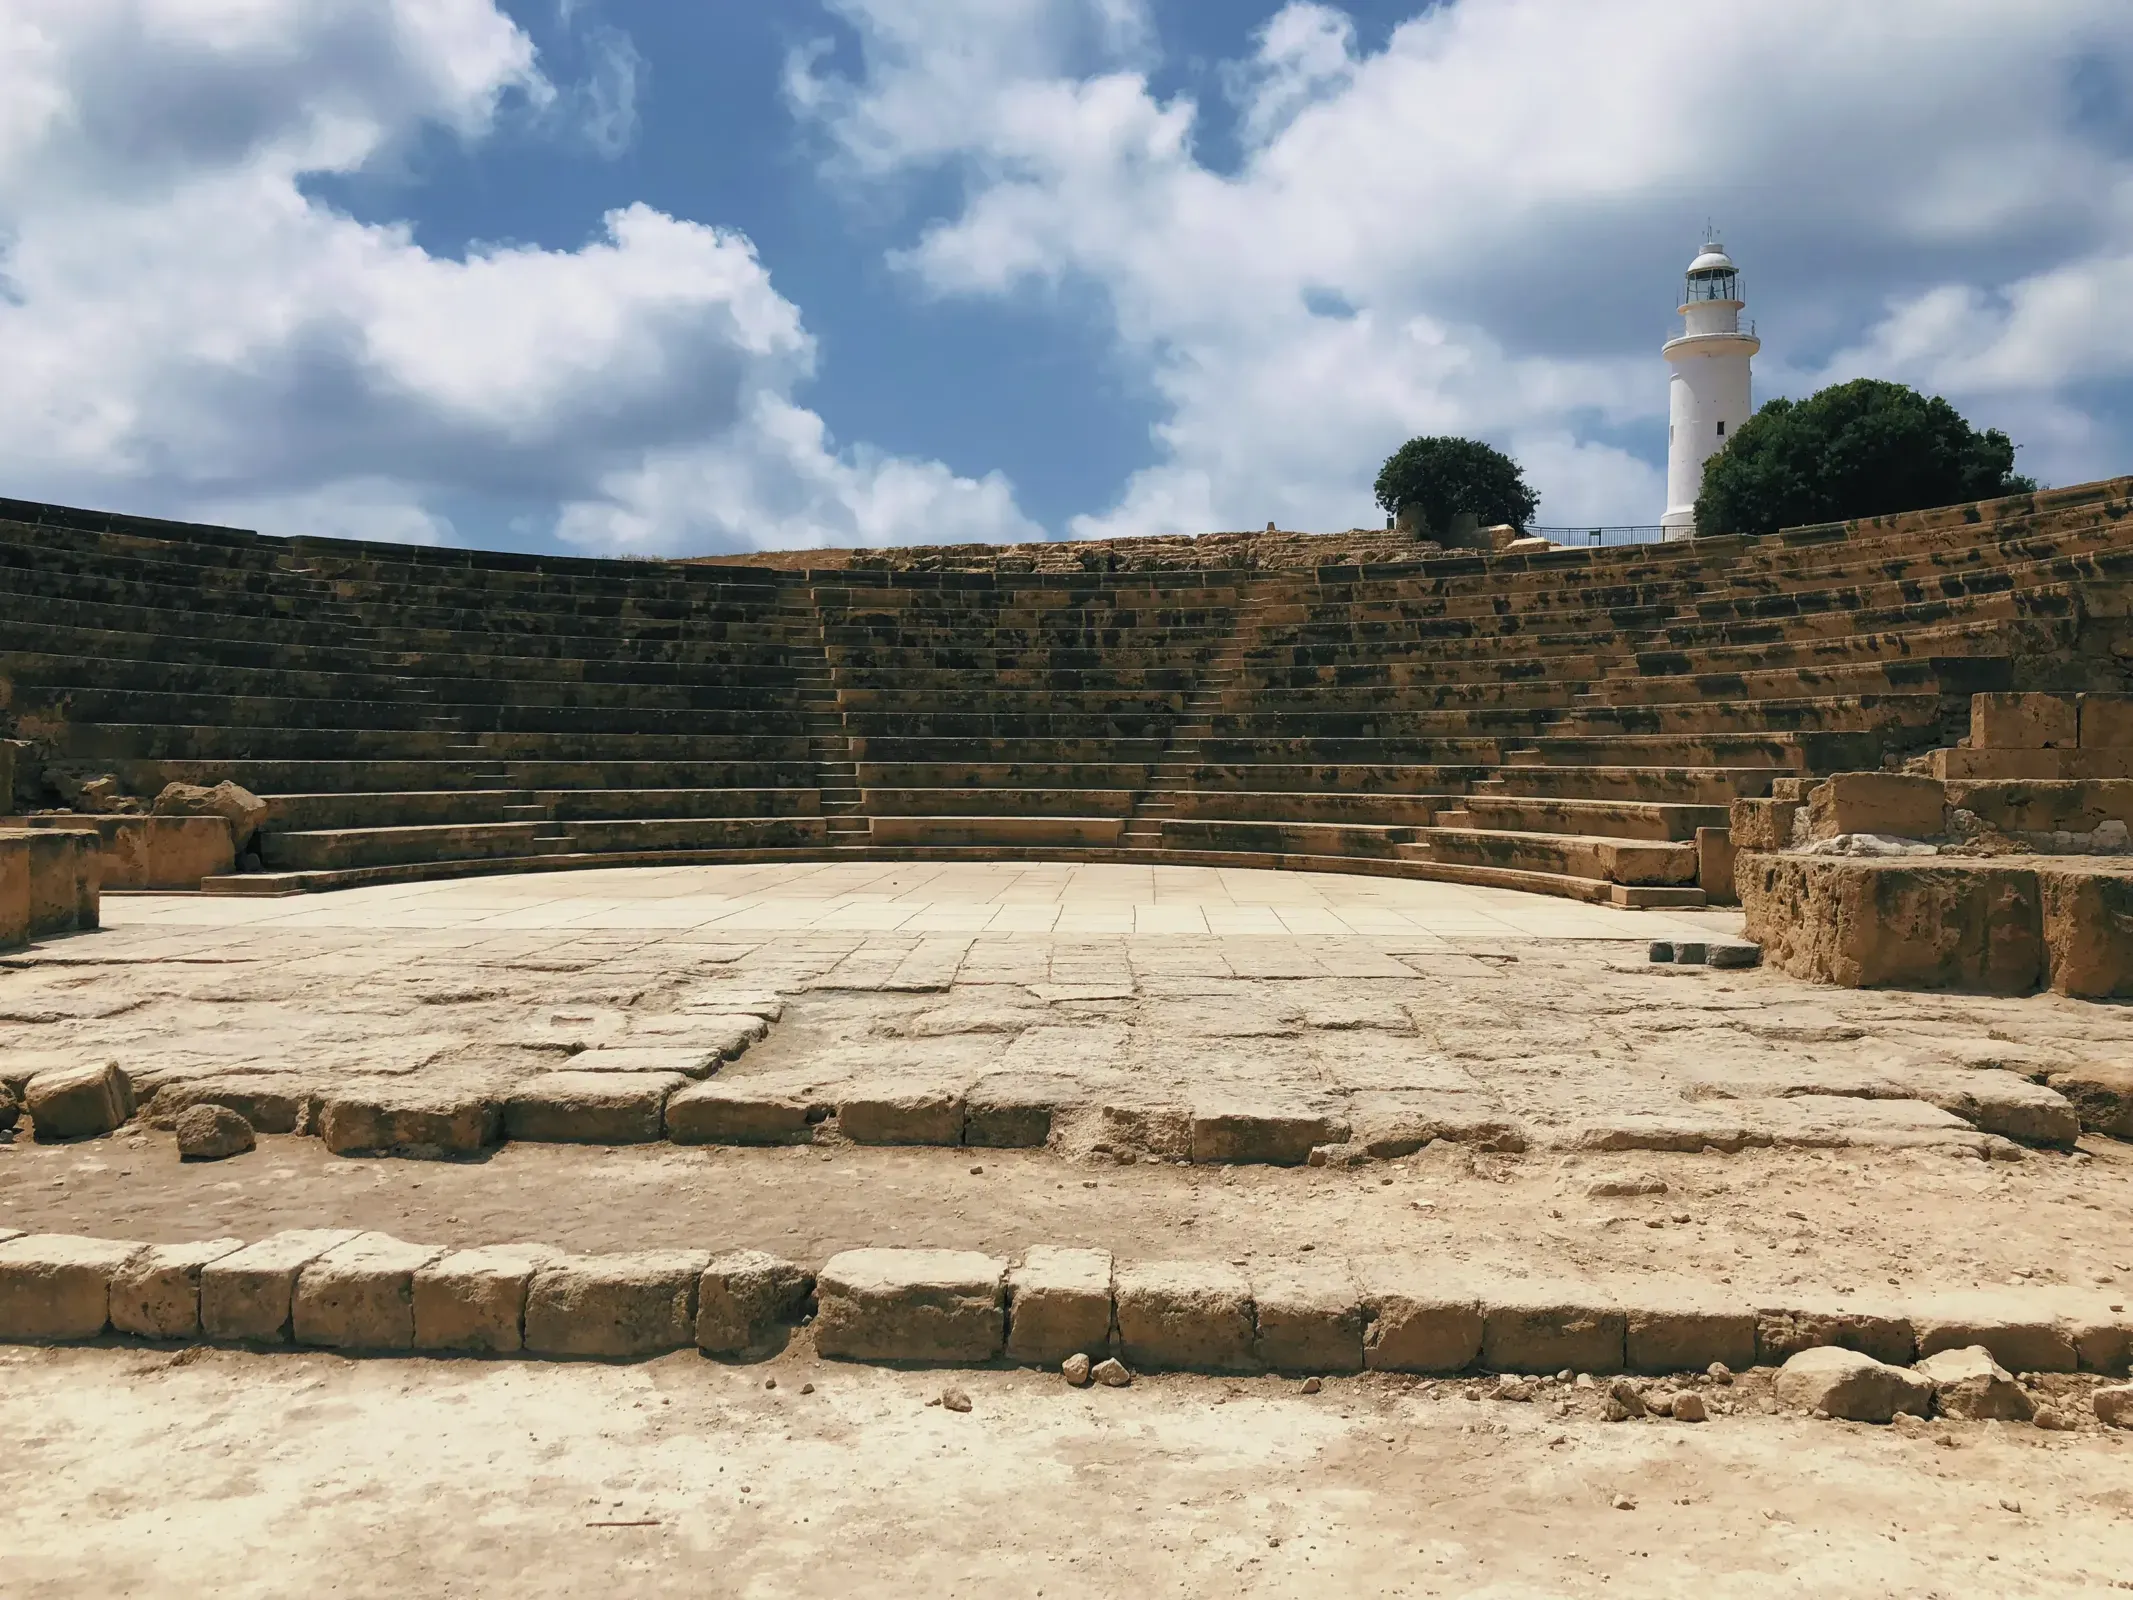 Vast stone arena with scattered rocks in Nea Paphos